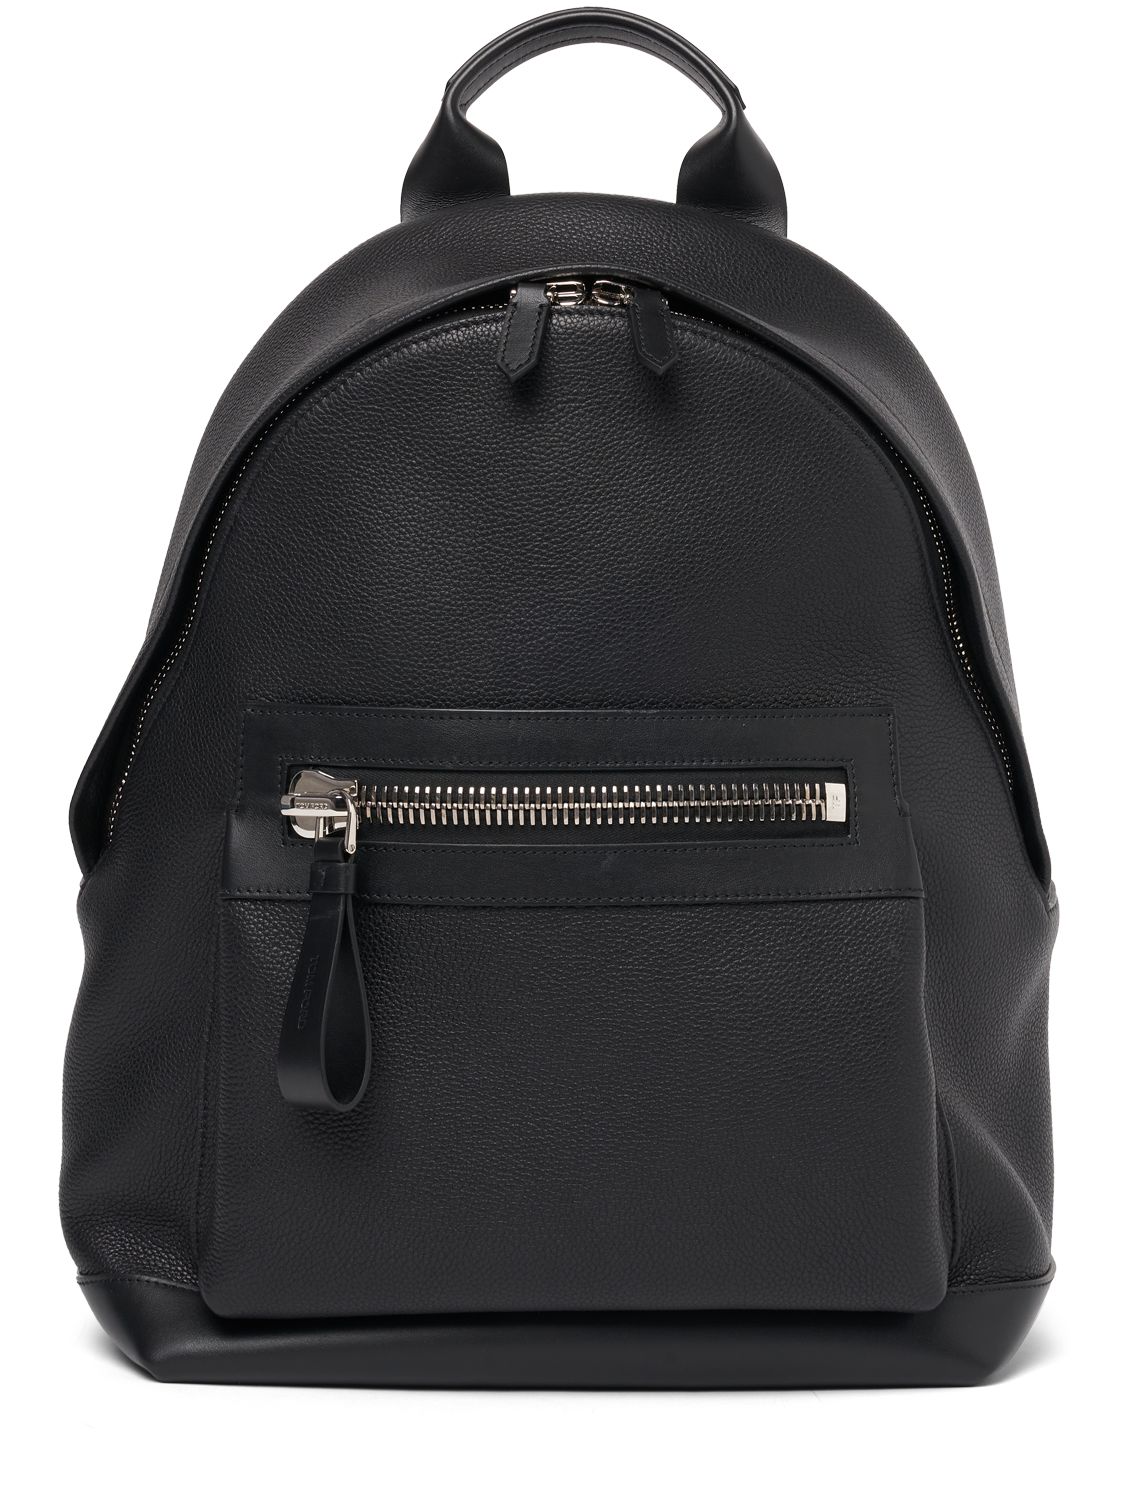 Buckley Soft Grain Leather Backpack